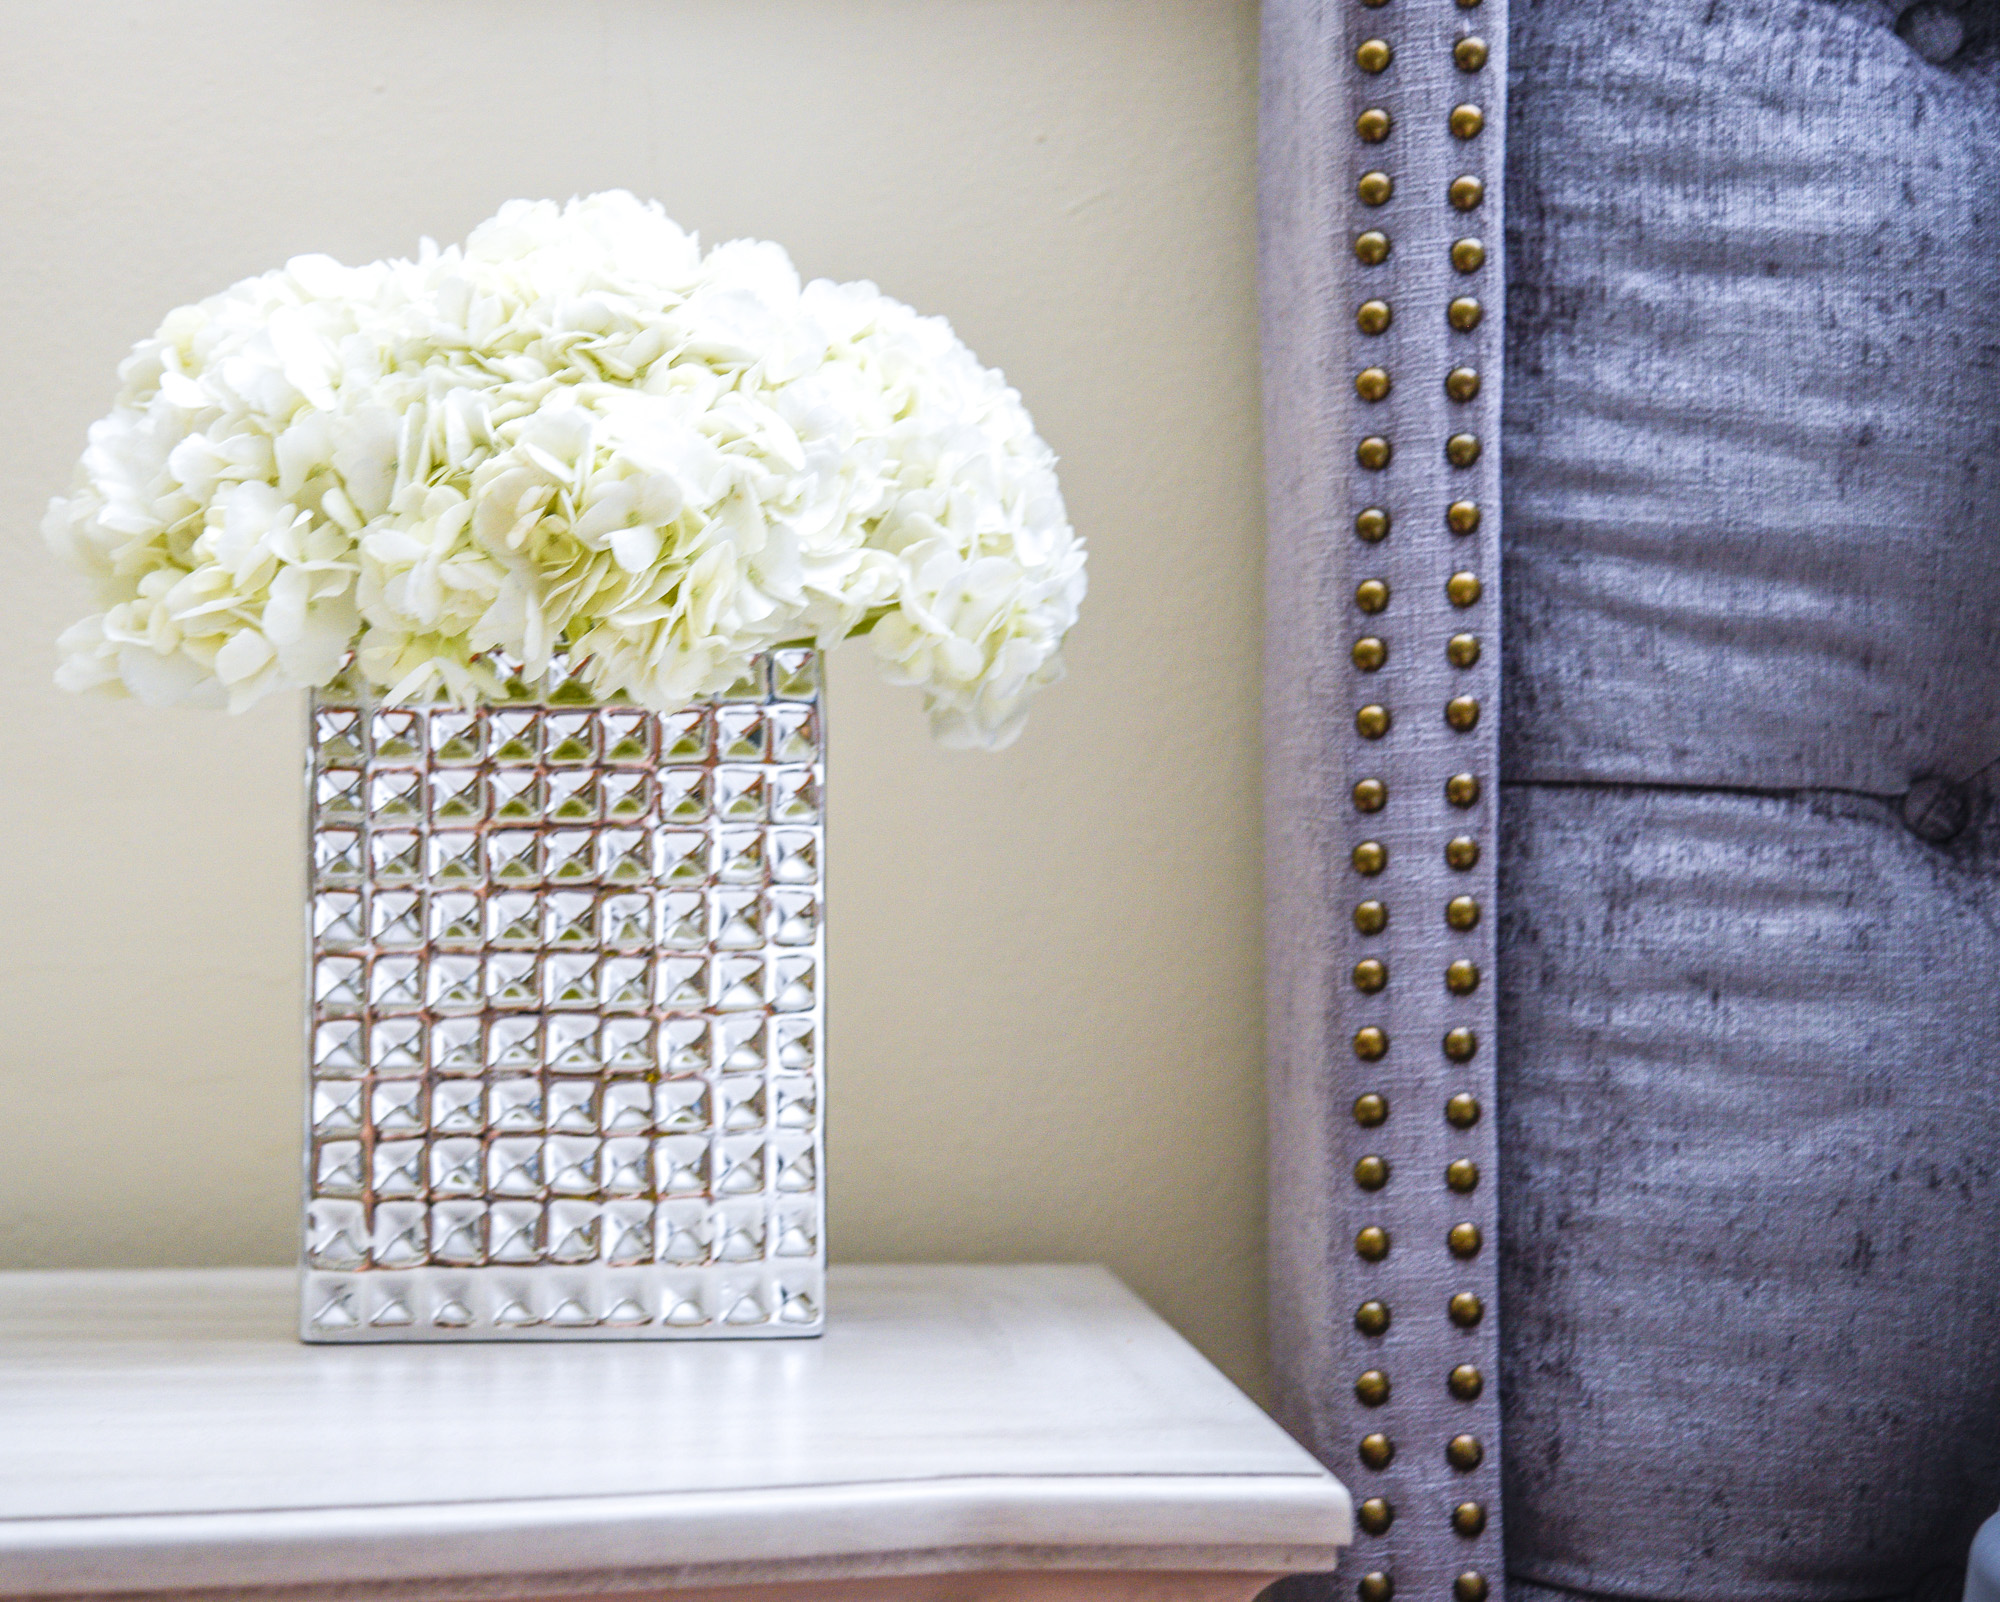 hydrangeas in a block silver vase for your bedside table 